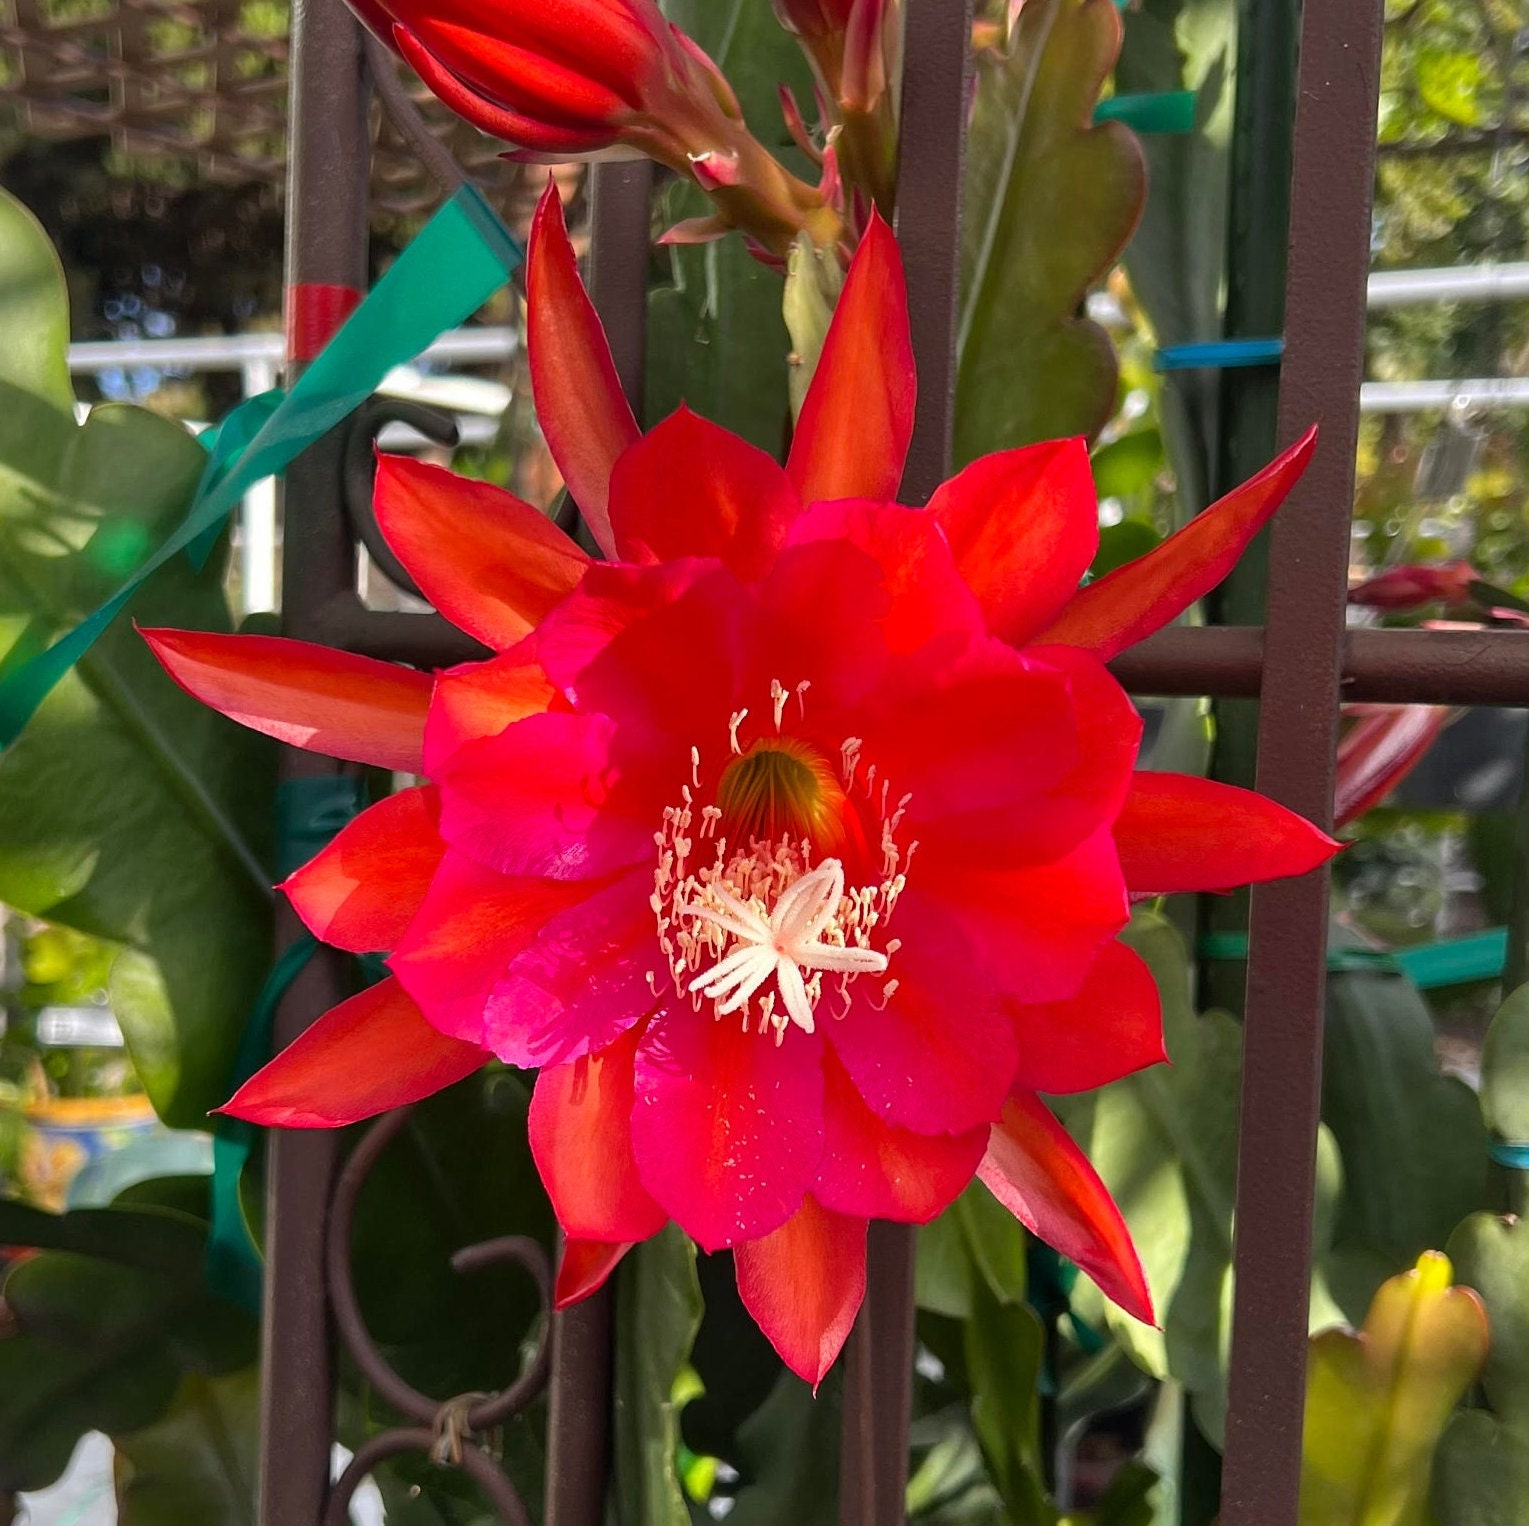 Orchid Cactus ‘Over the Top’ (Epiphyllum hybrid)